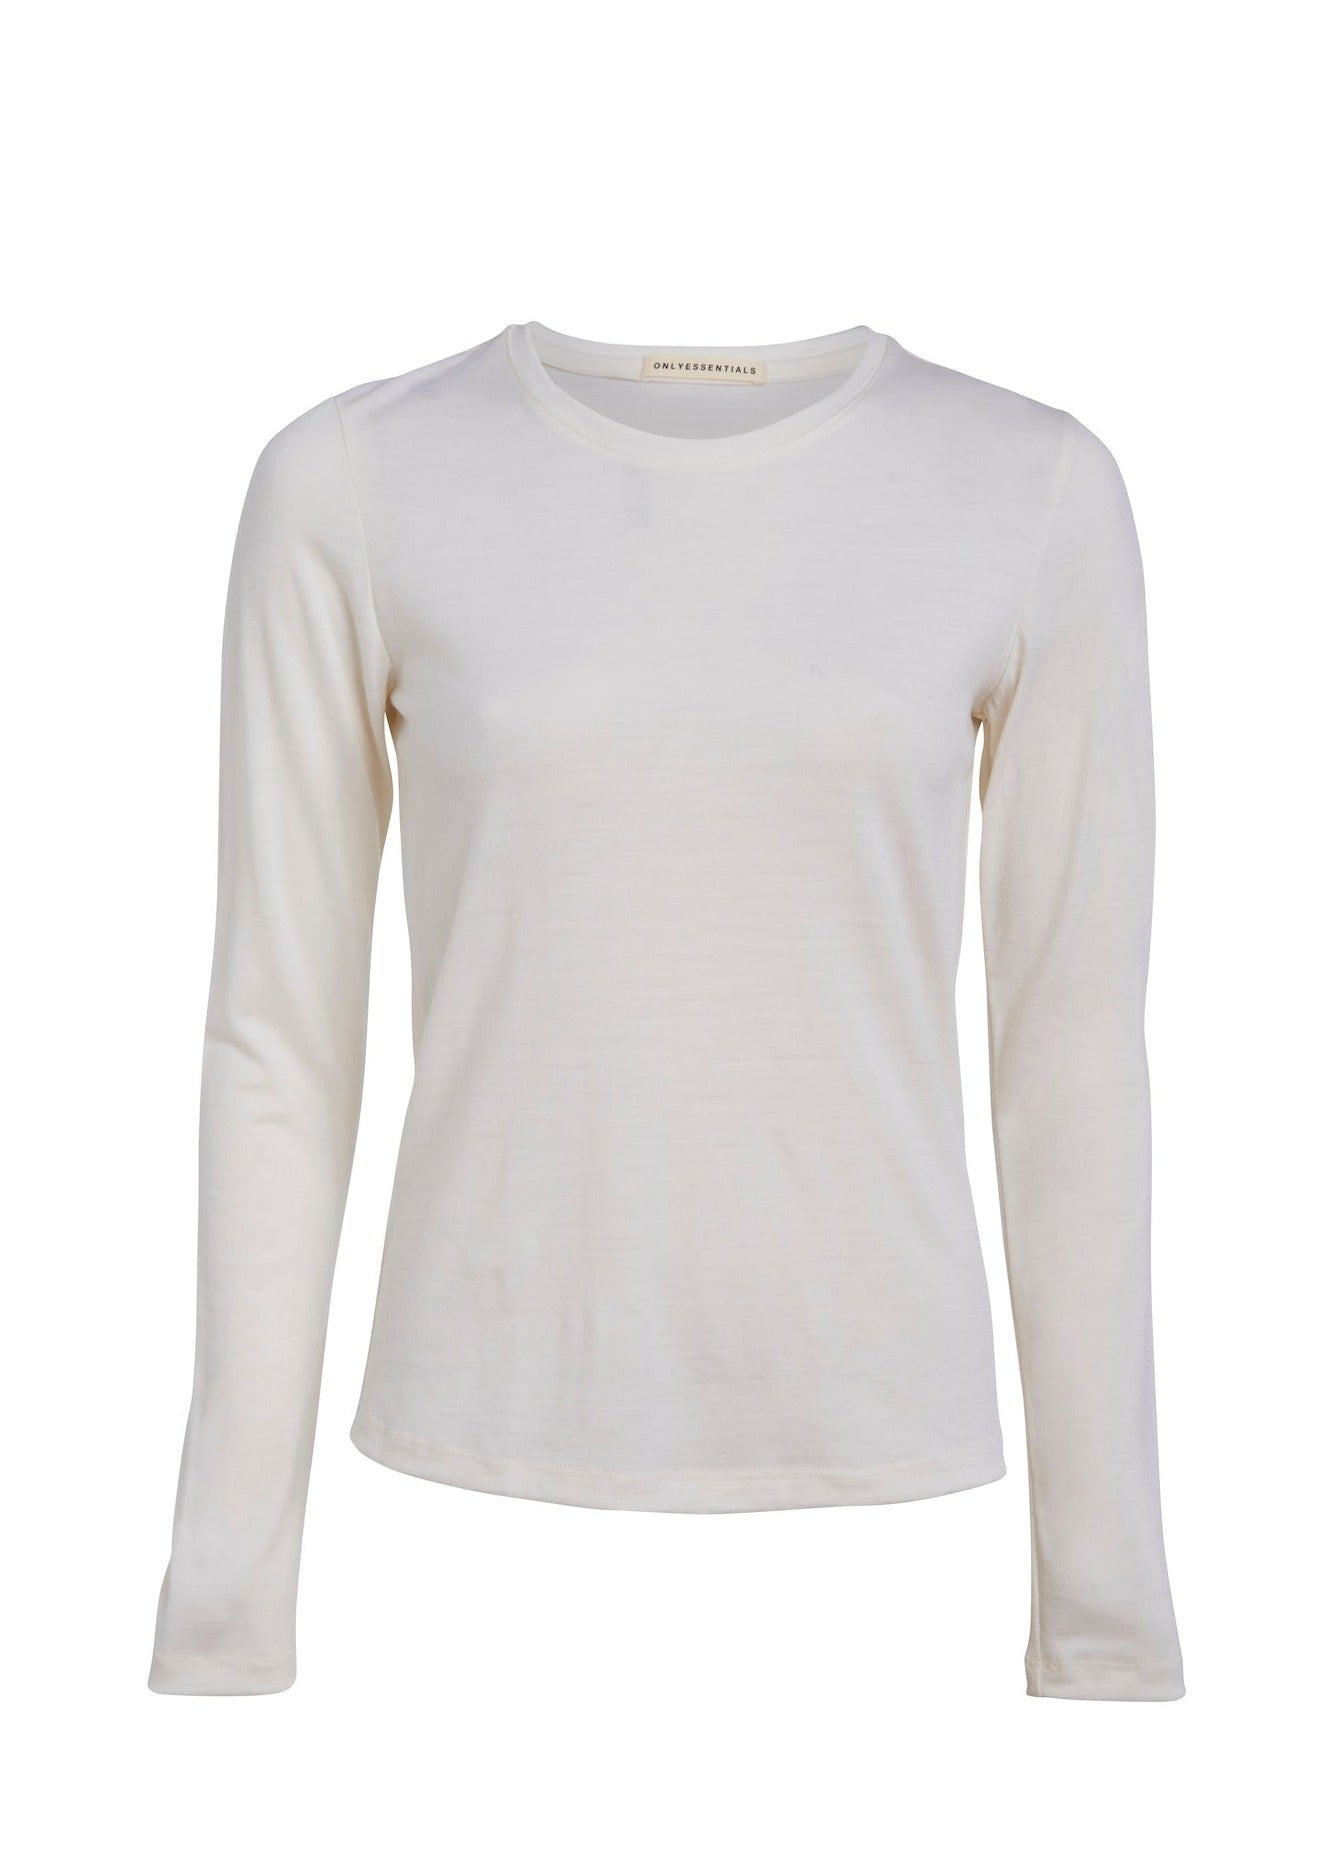 This classic long-sleeve crew neck in traceable merino wool is soft and breathable designed for versatility and comfort in your everyday life.